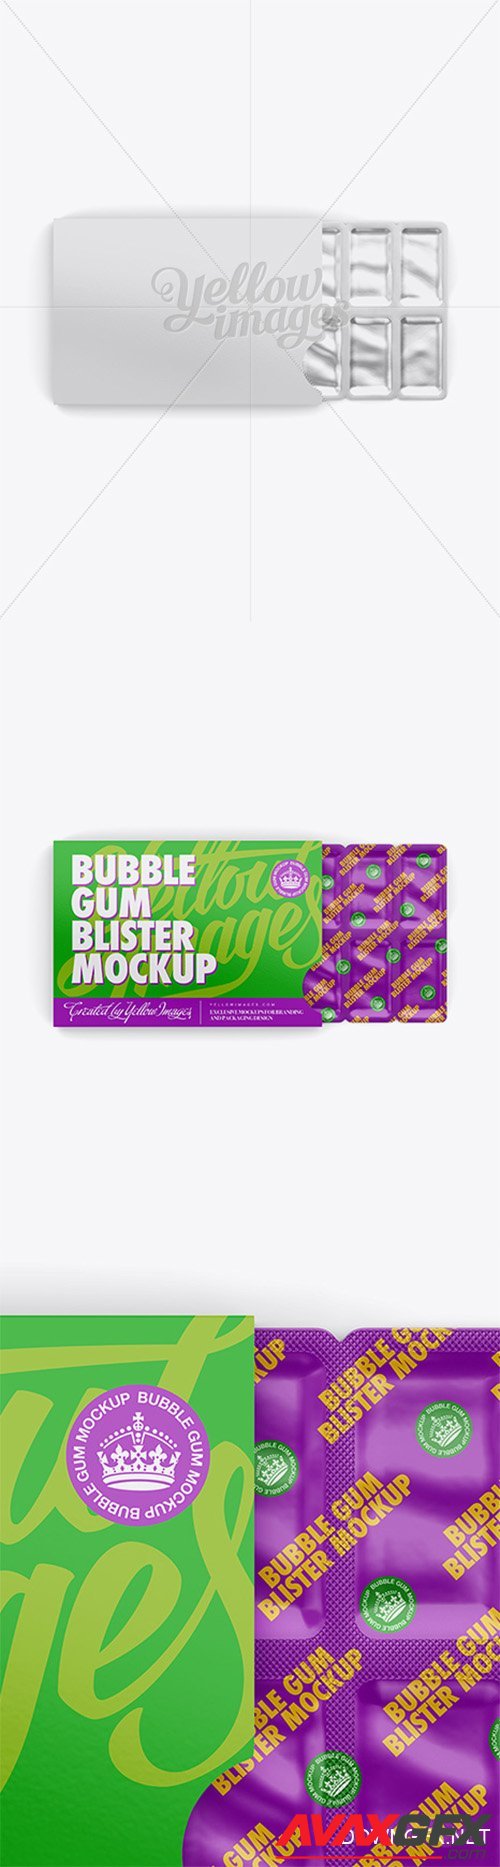 Chewing Gum in Blister Package Mockup - Bottom 13298 Layered TIF